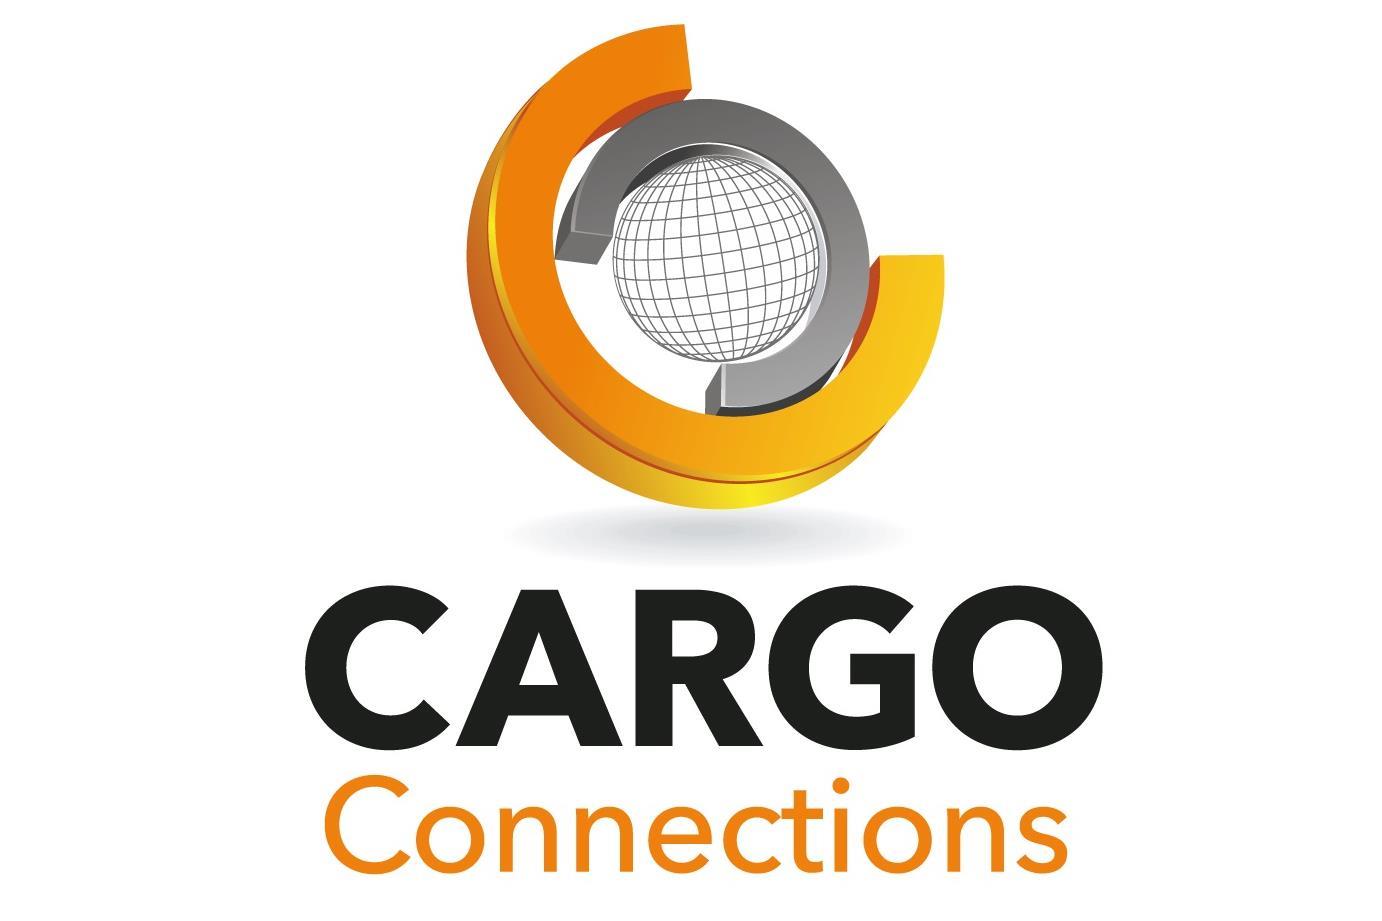 Cargo connections